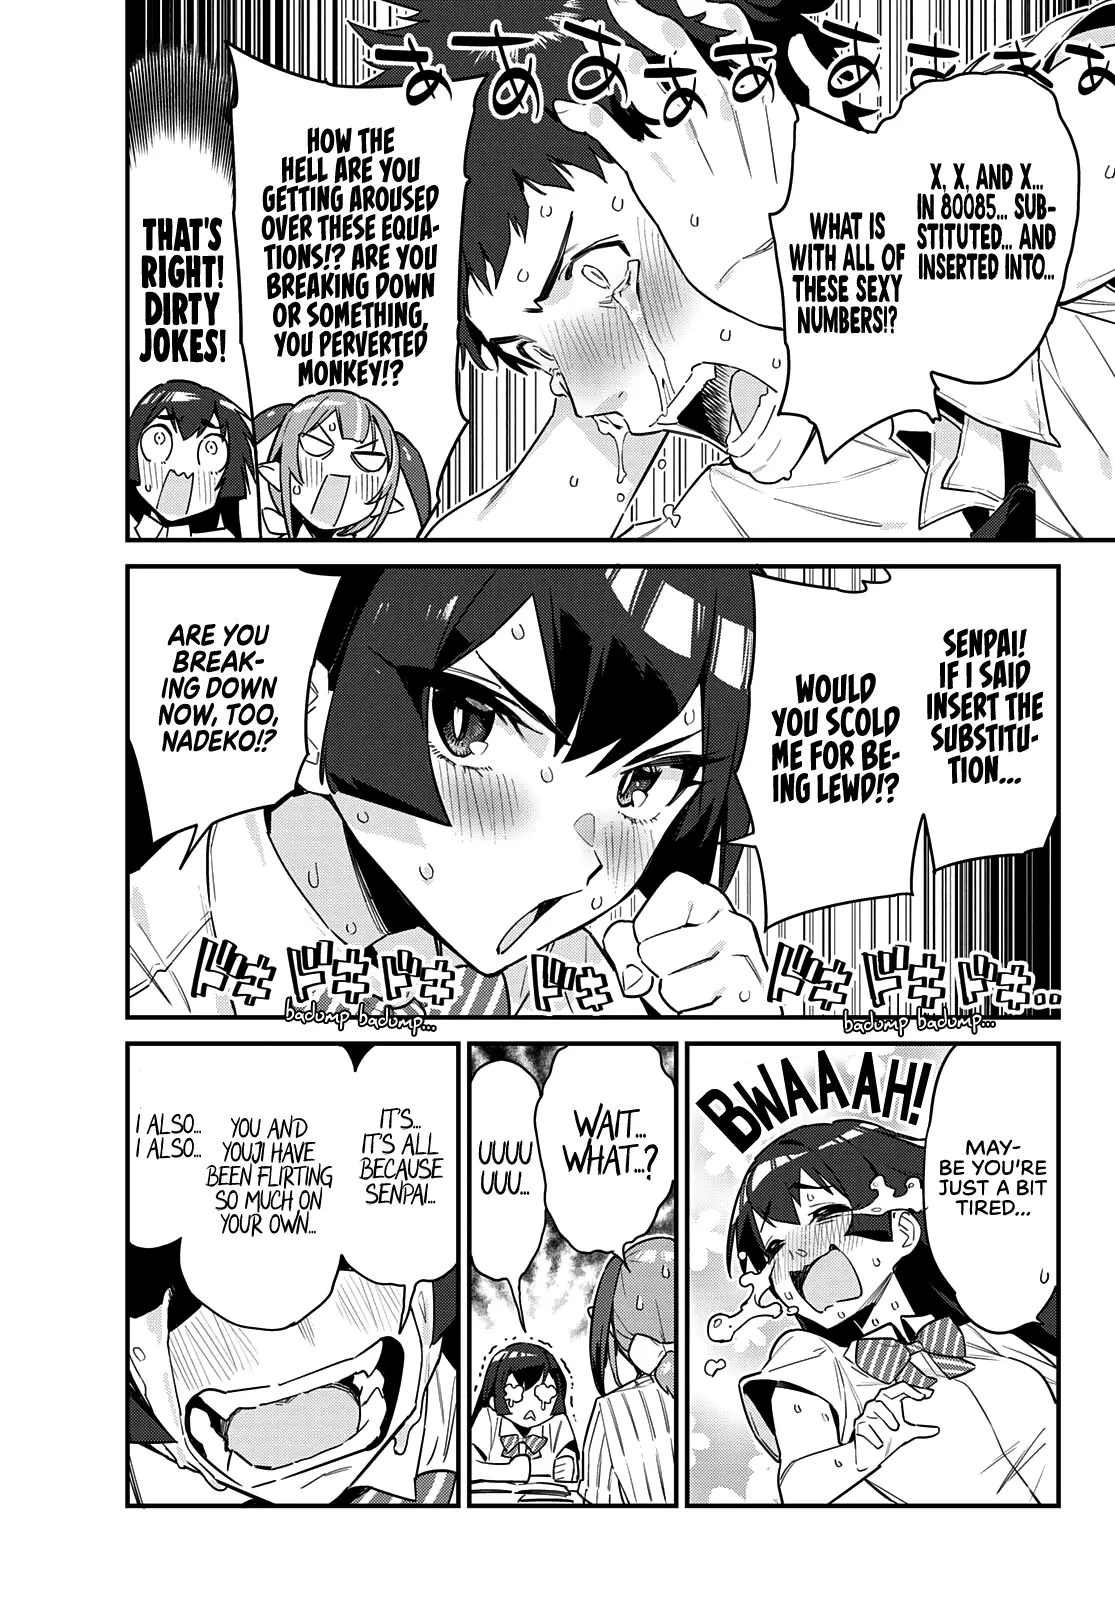 Kanan-Sama Is Easy As Hell! - 19 page 8-13a66dca